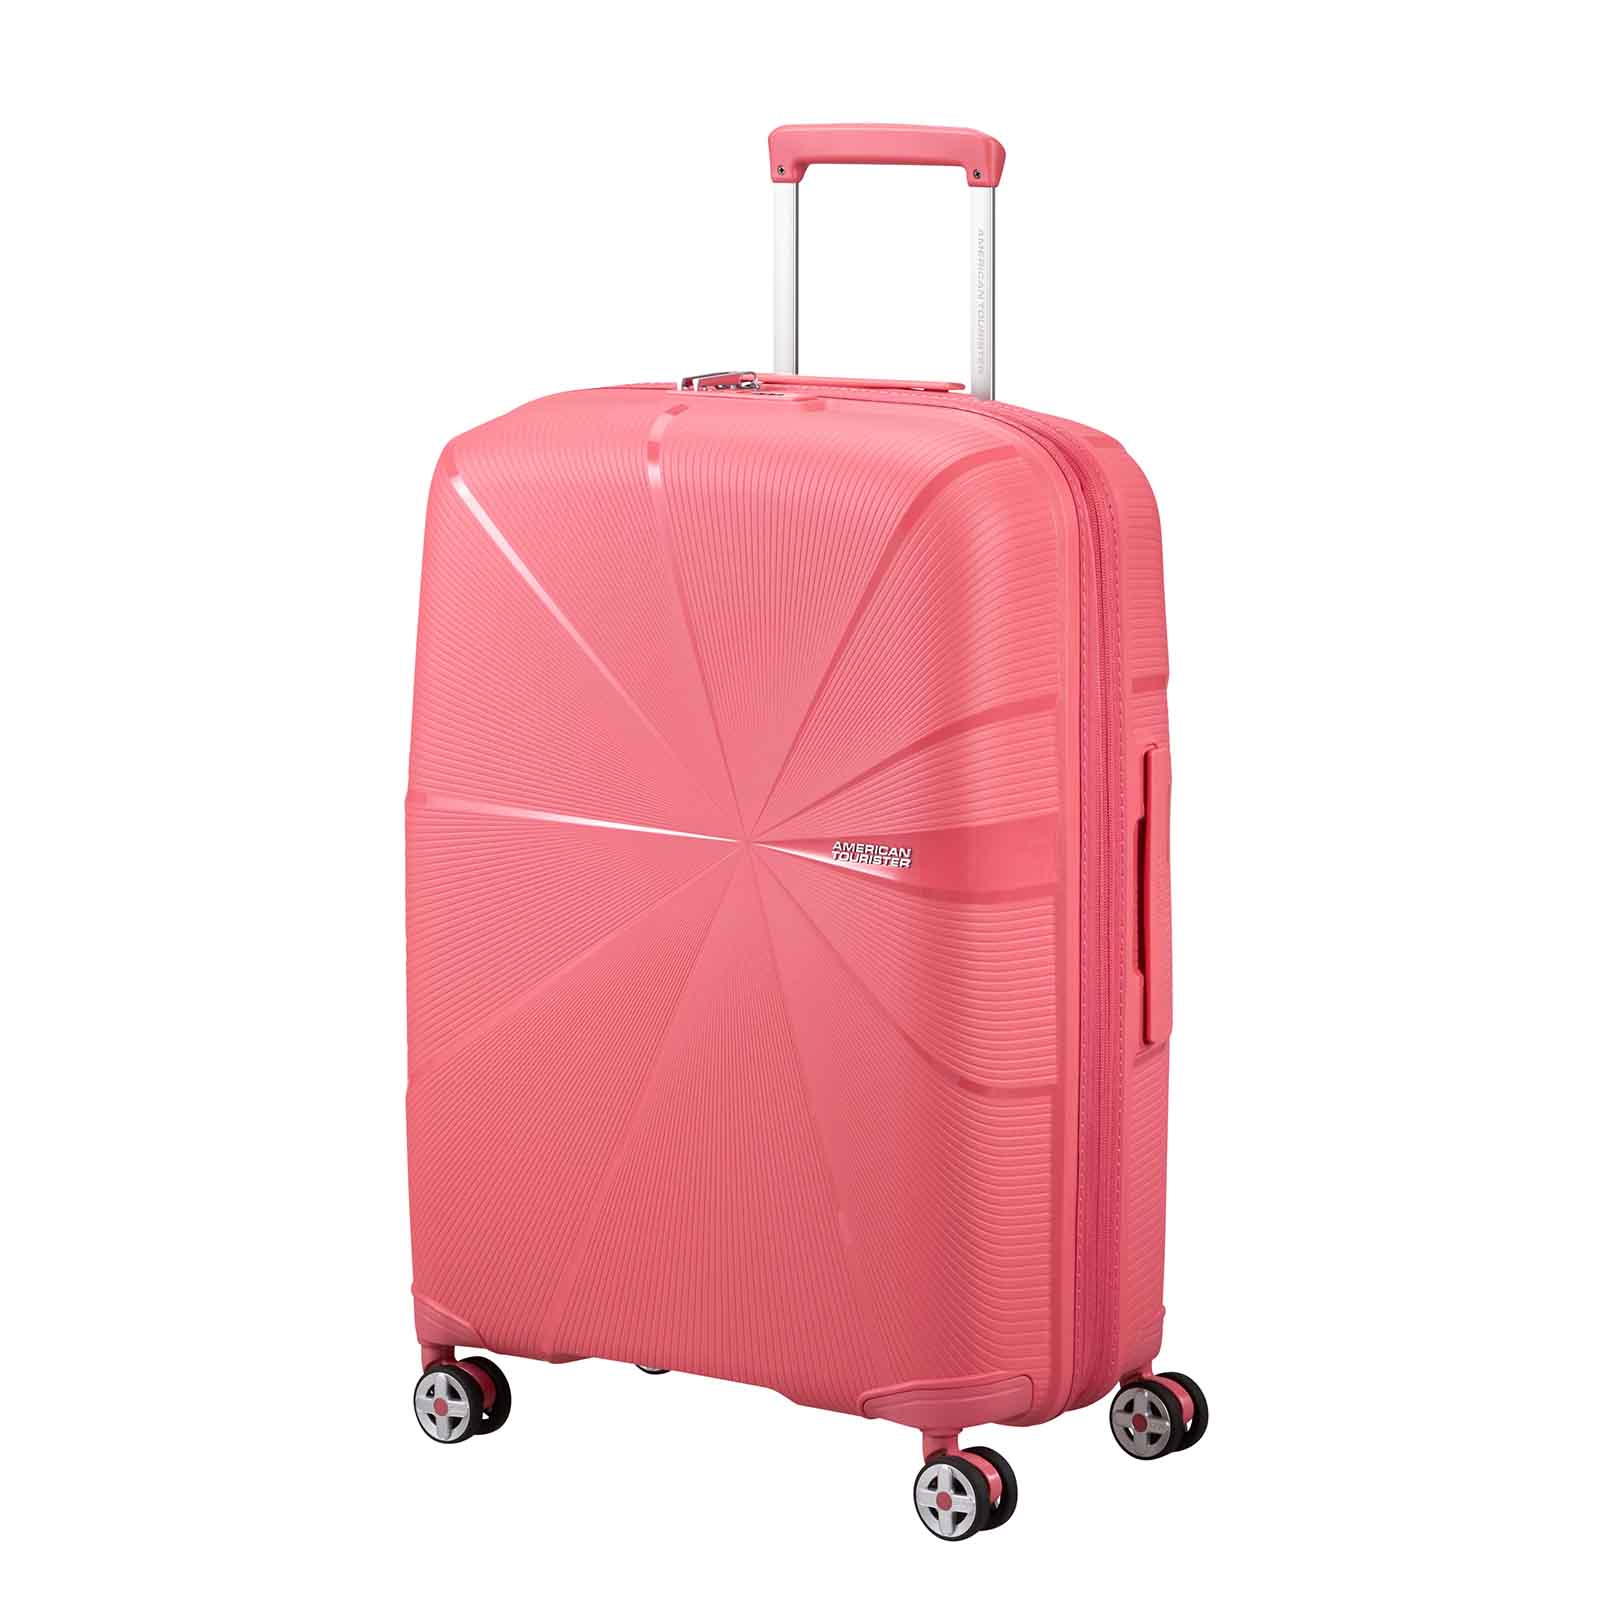 American-Tourister-Starvibe-67cm-Suitcase-Coral-Angle